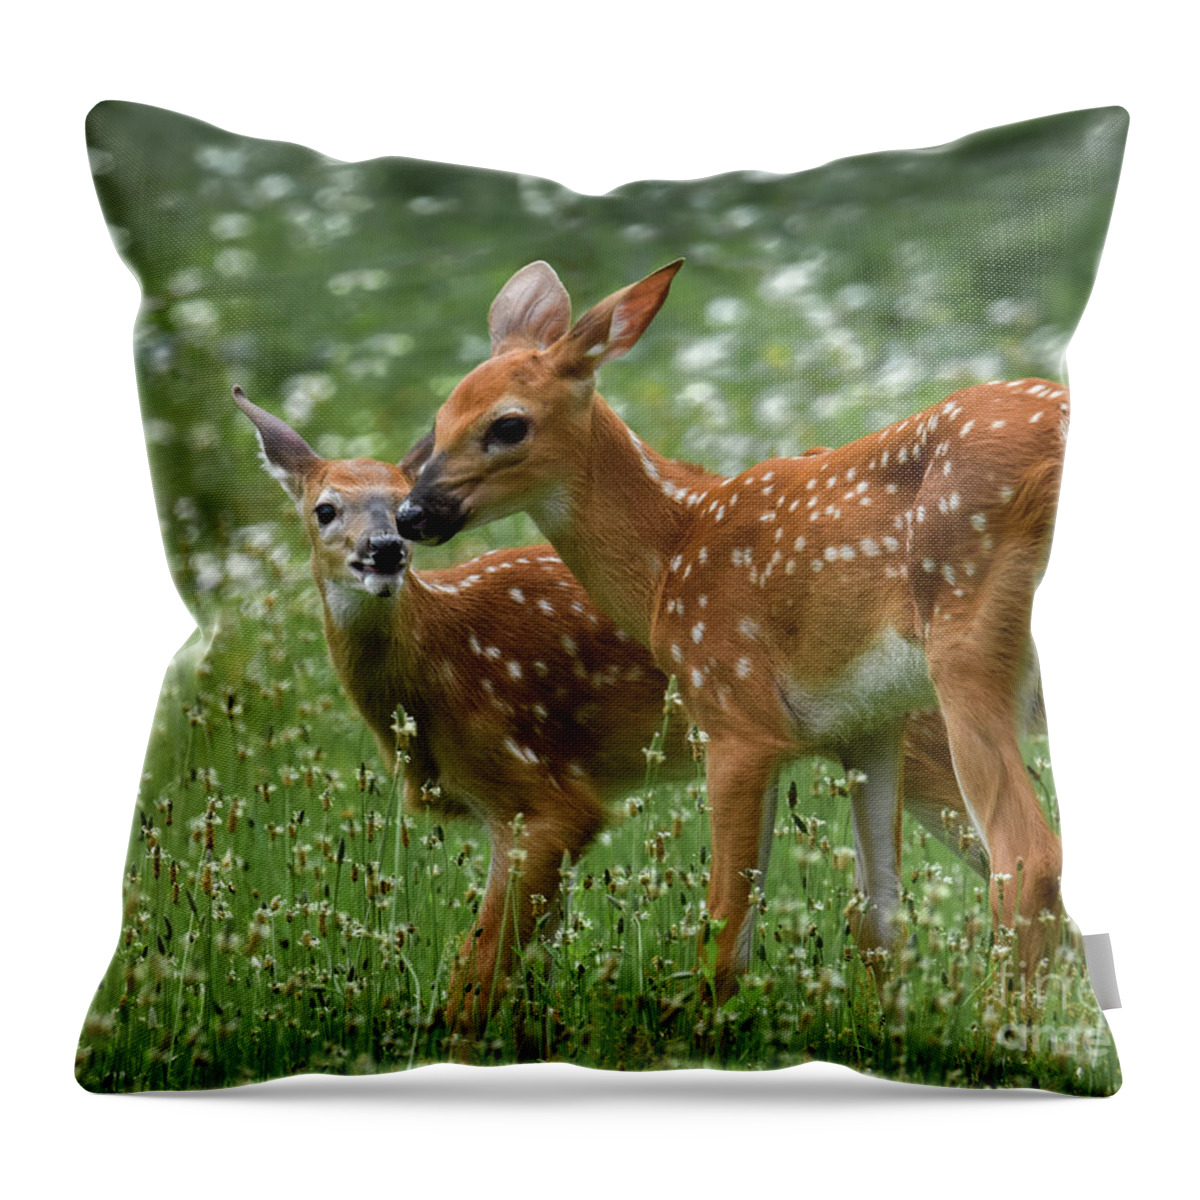 Twins Throw Pillow featuring the photograph Twins by Amy Porter